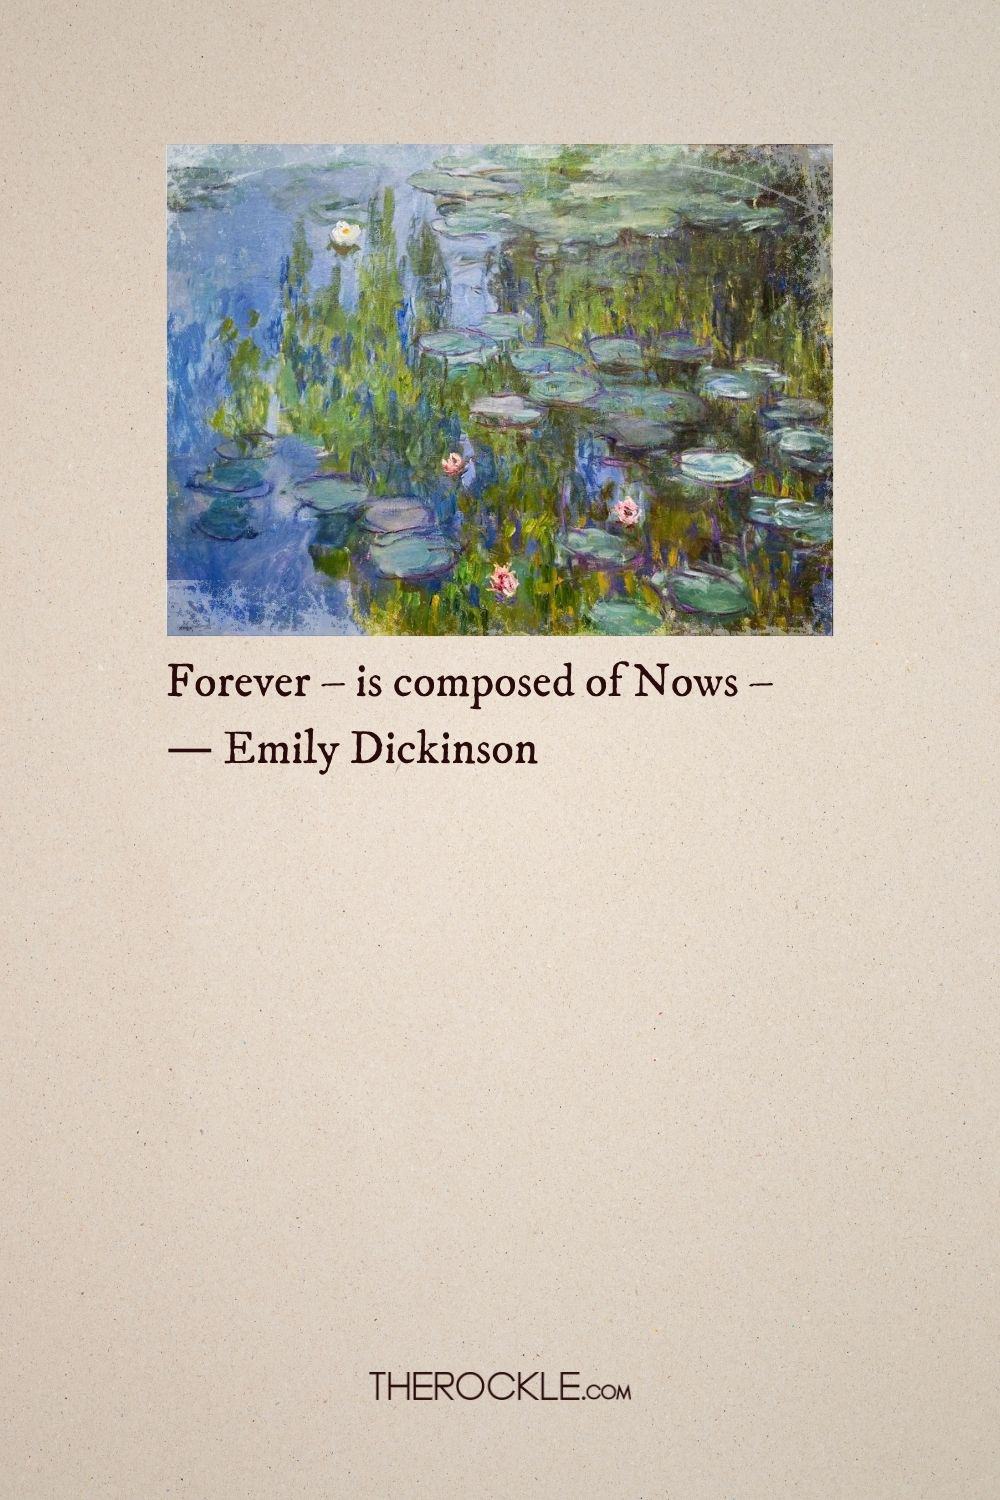 Emily Dickinson on embracing the present moment